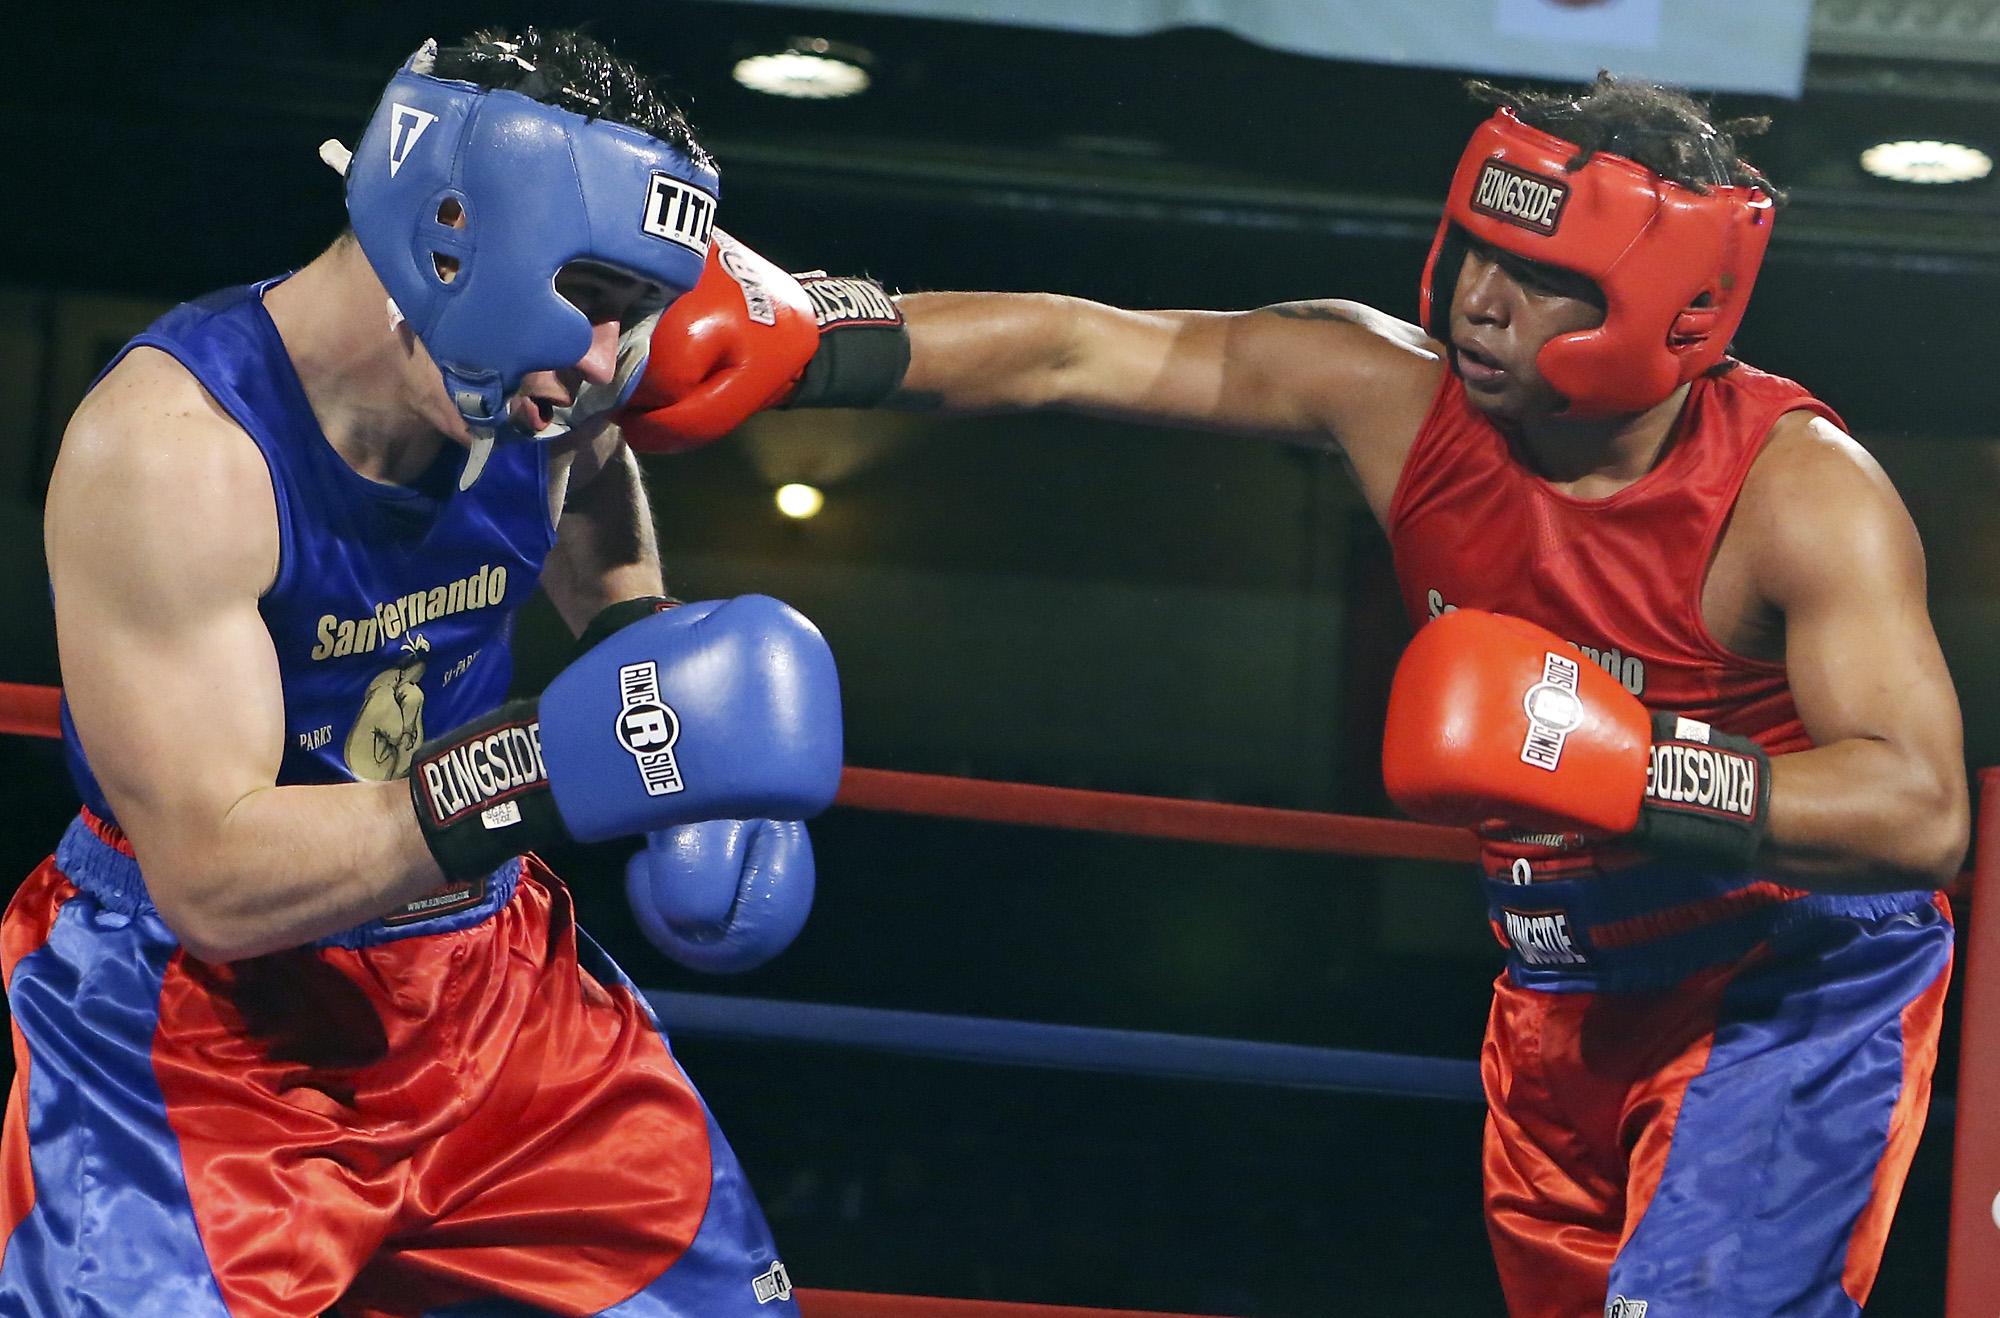 Local Golden Gloves tournament looks to survive knockdown